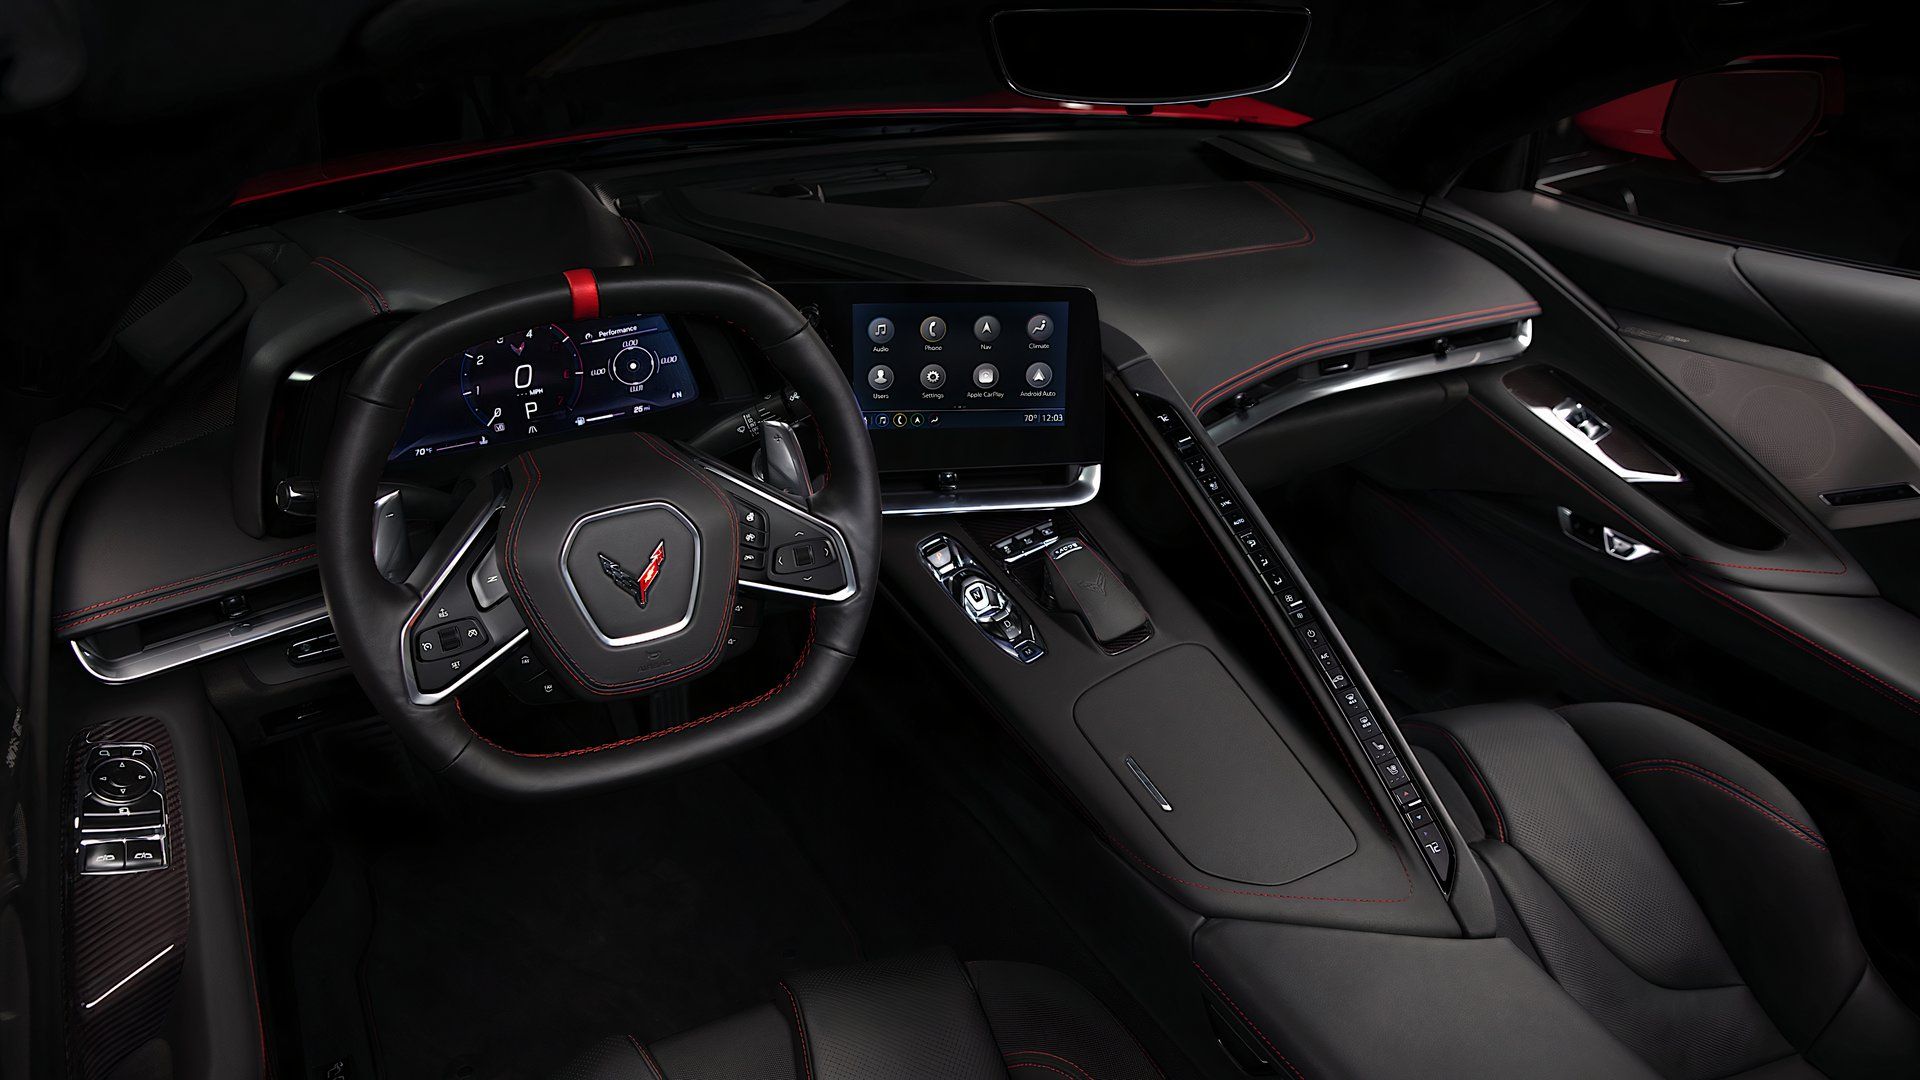 2024 Chevrolet Corvette cockpit Showing steering wheel, front seats and HUD